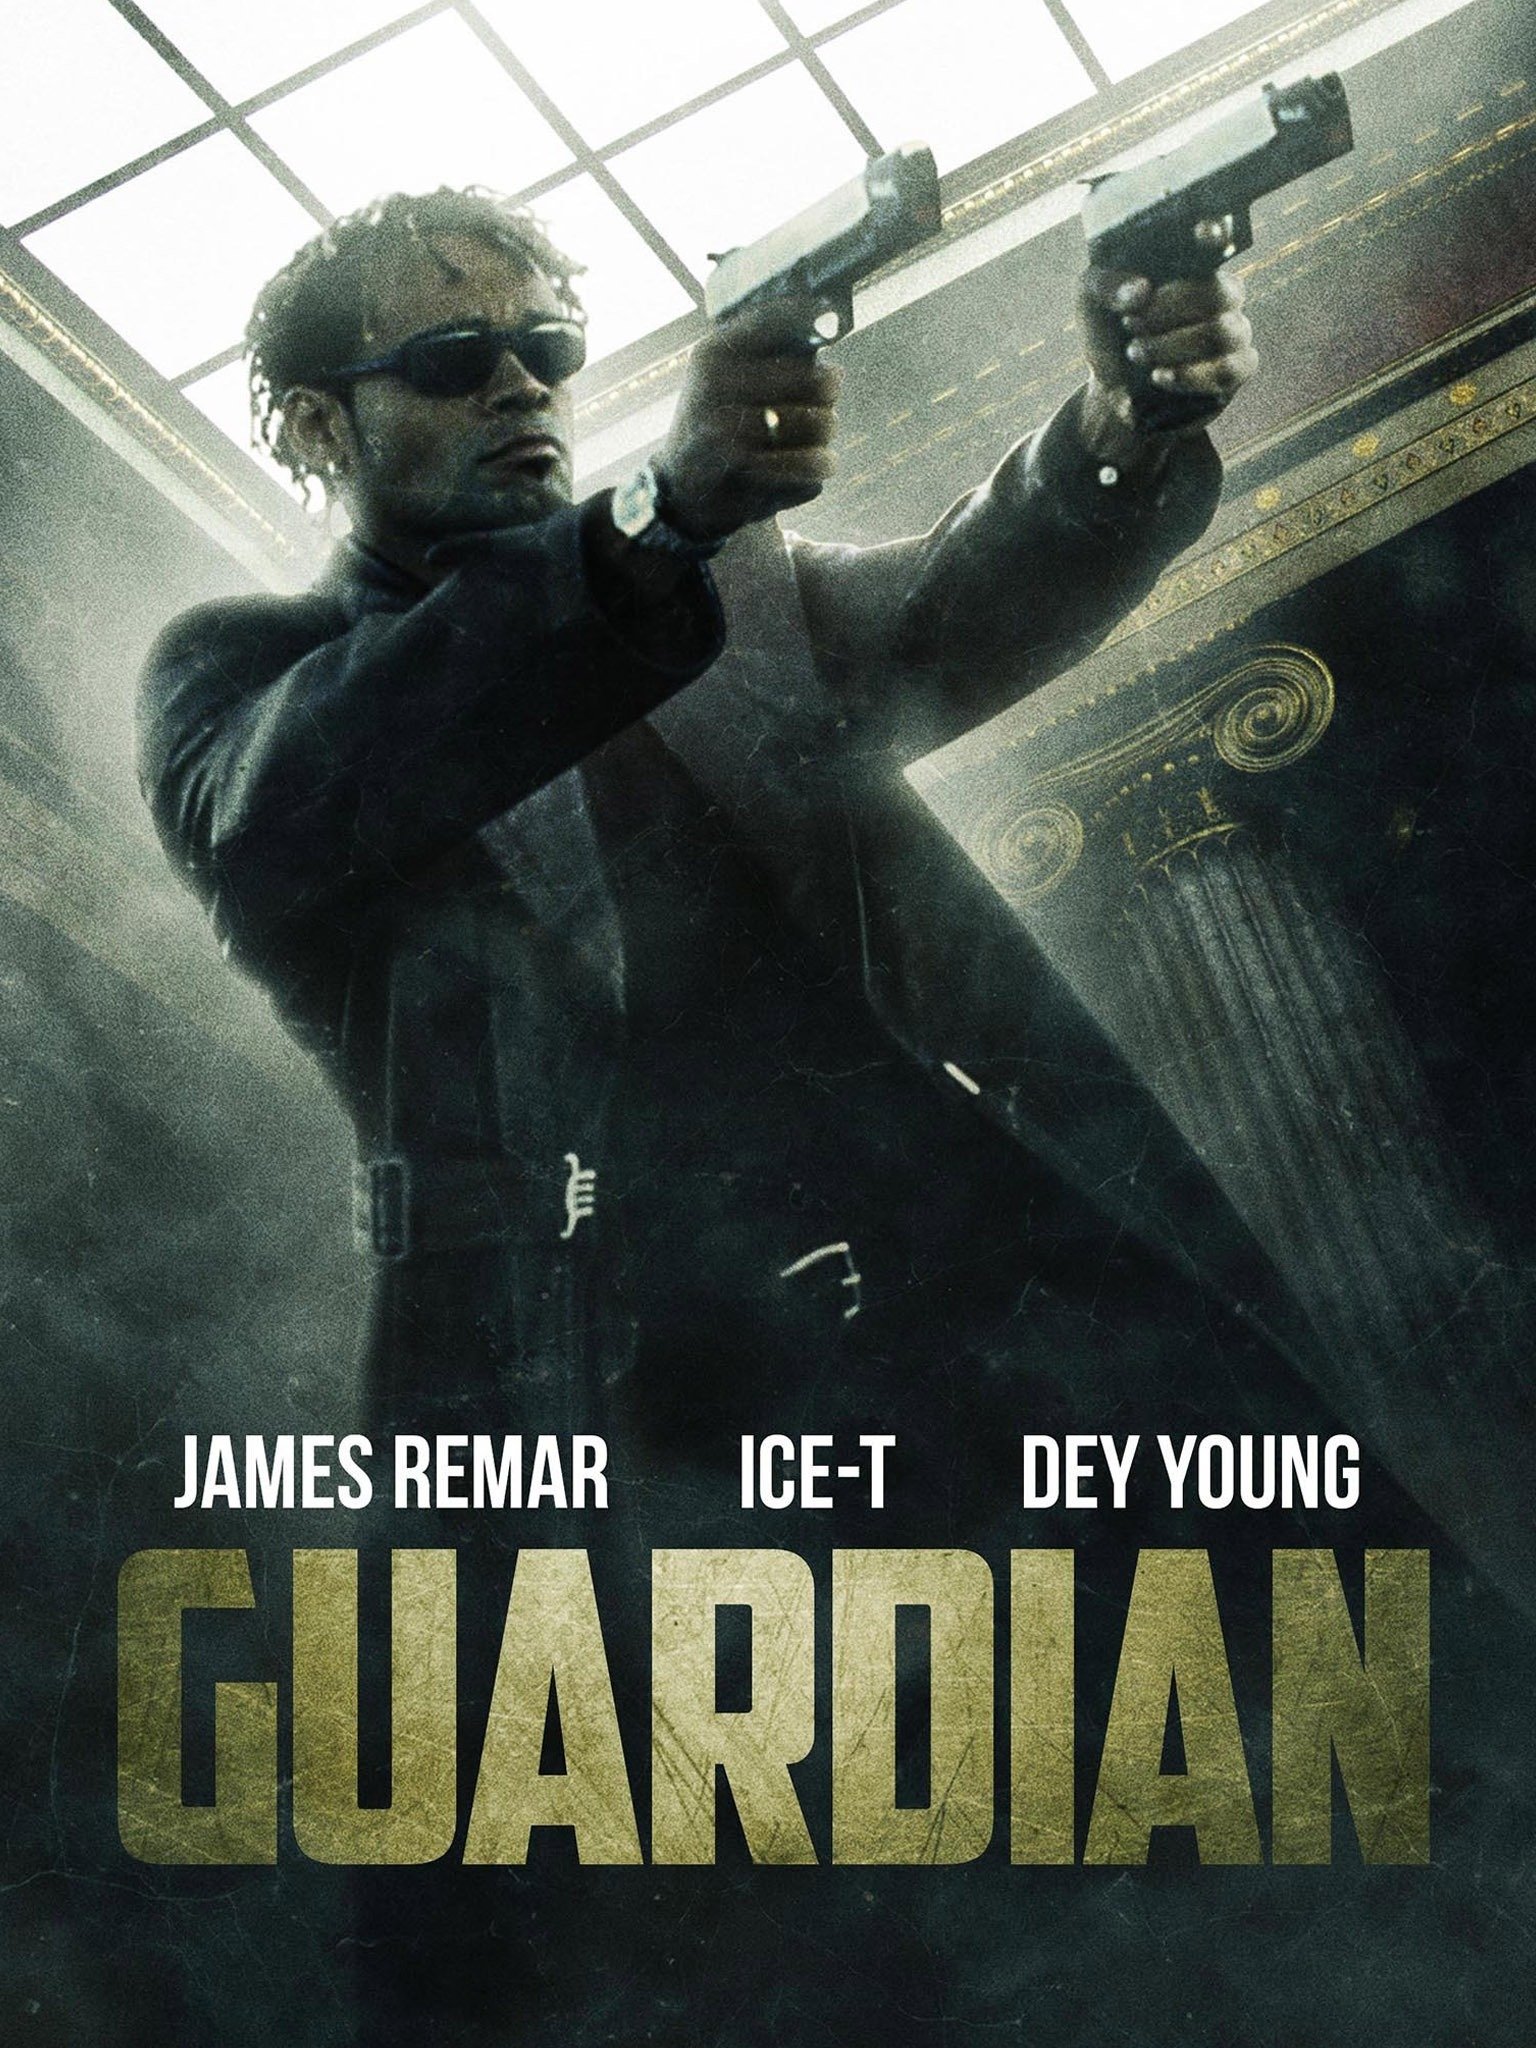 2012 movie review guardian